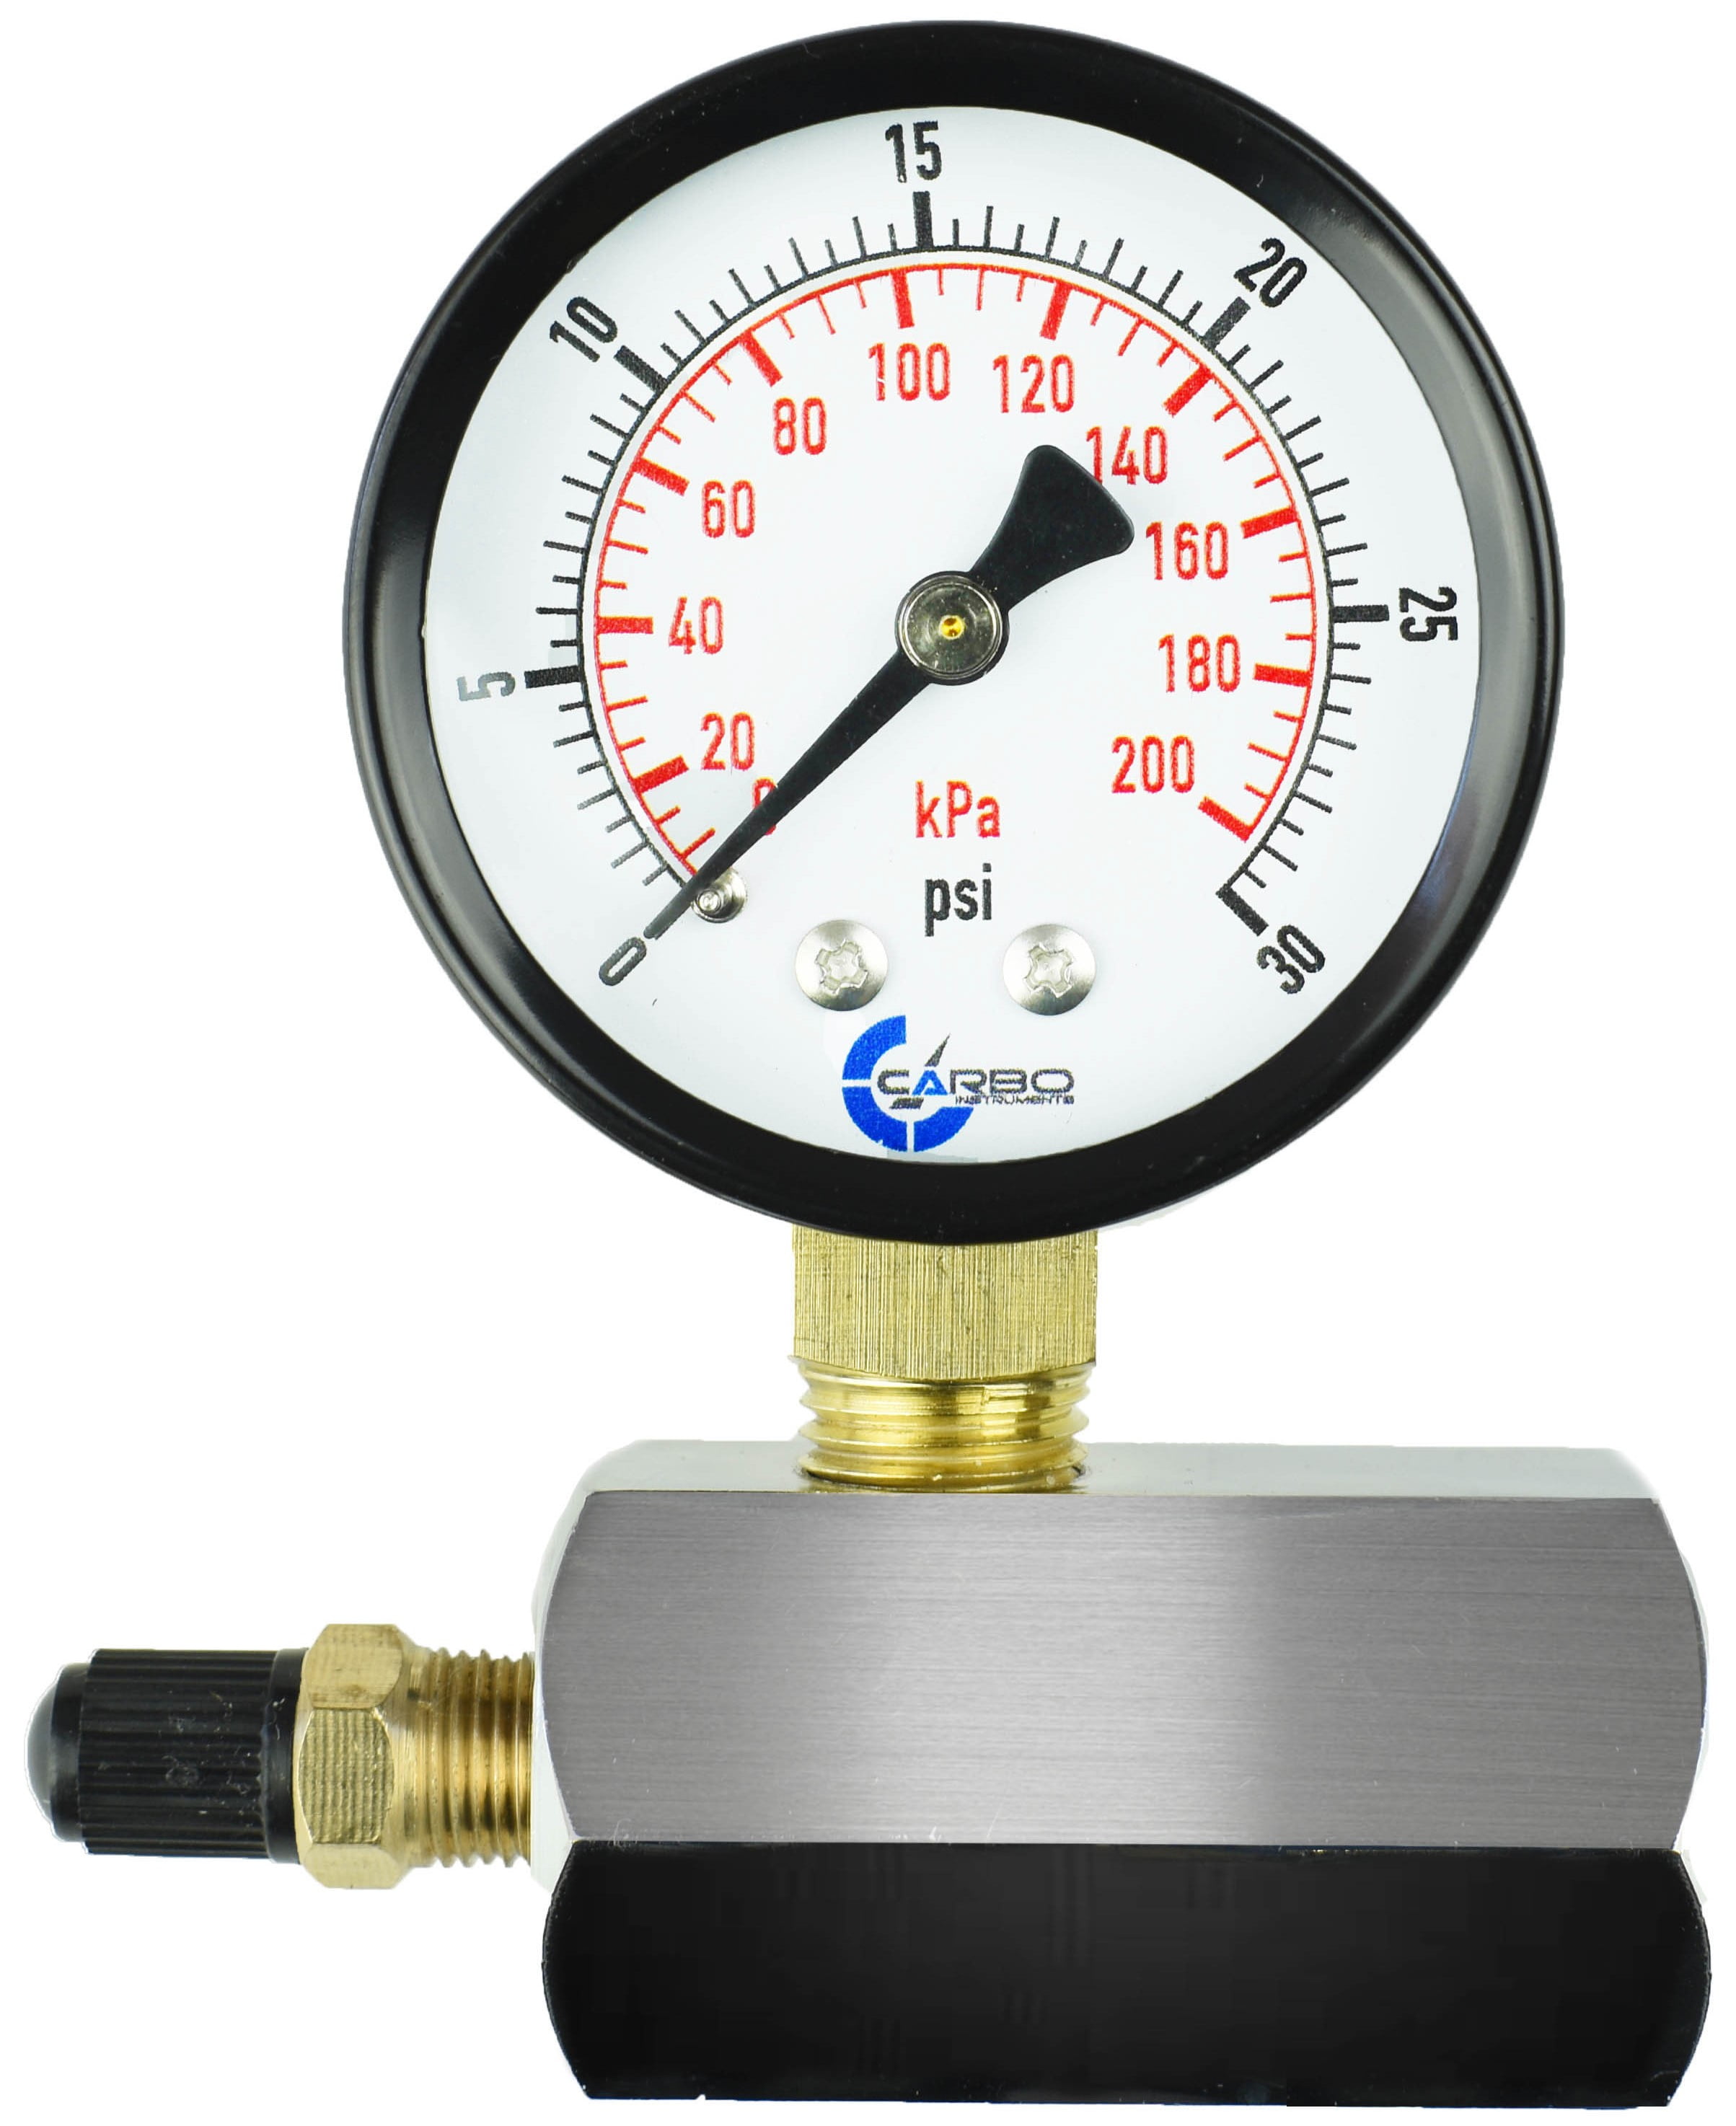 Gas Test Pressure Gauge 30 Pound 30 PSI 200 kPa 3/4” FNPT Connection Assembly 